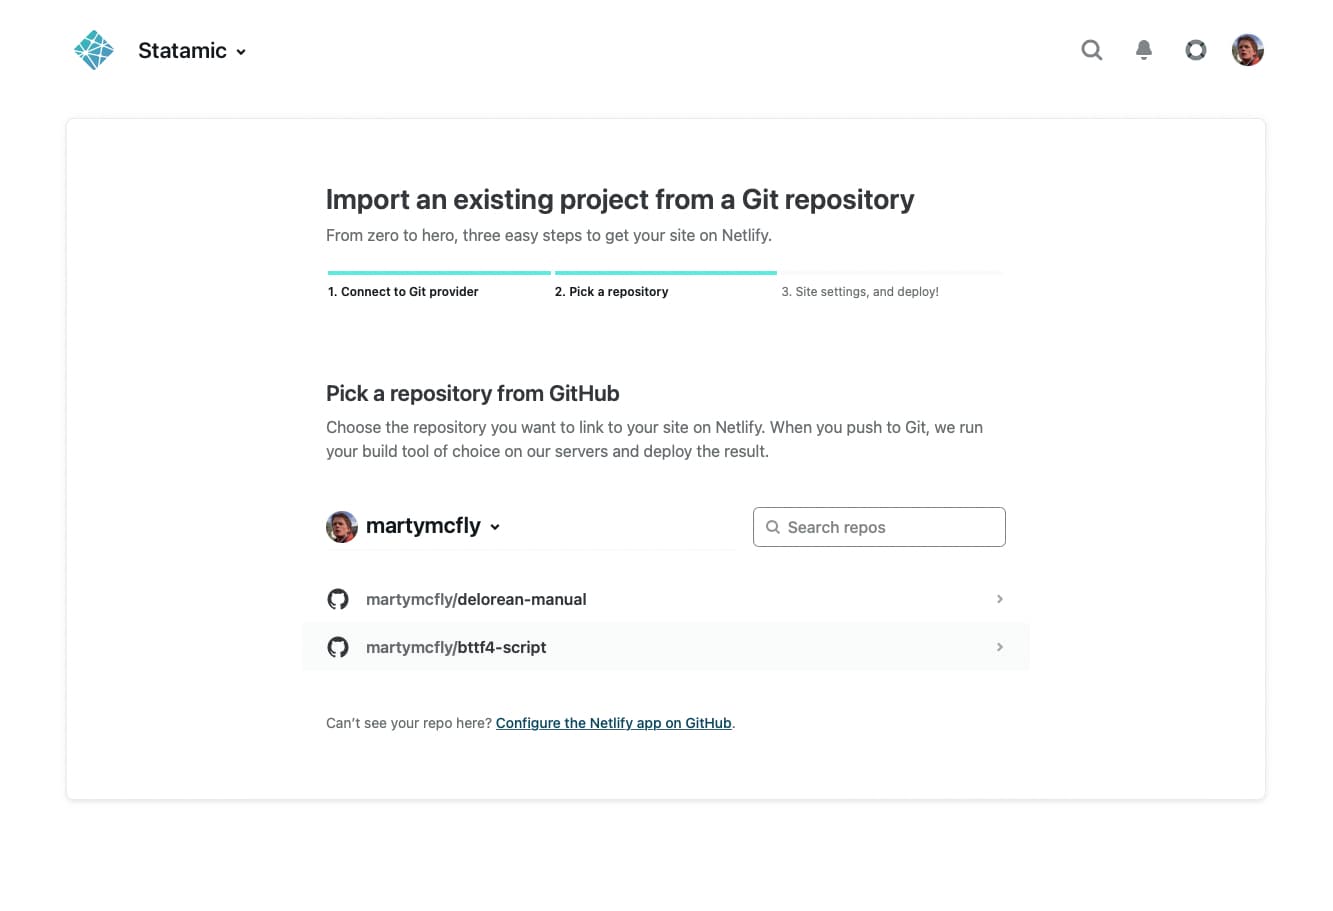 Pick a repository from your chosen Git provider